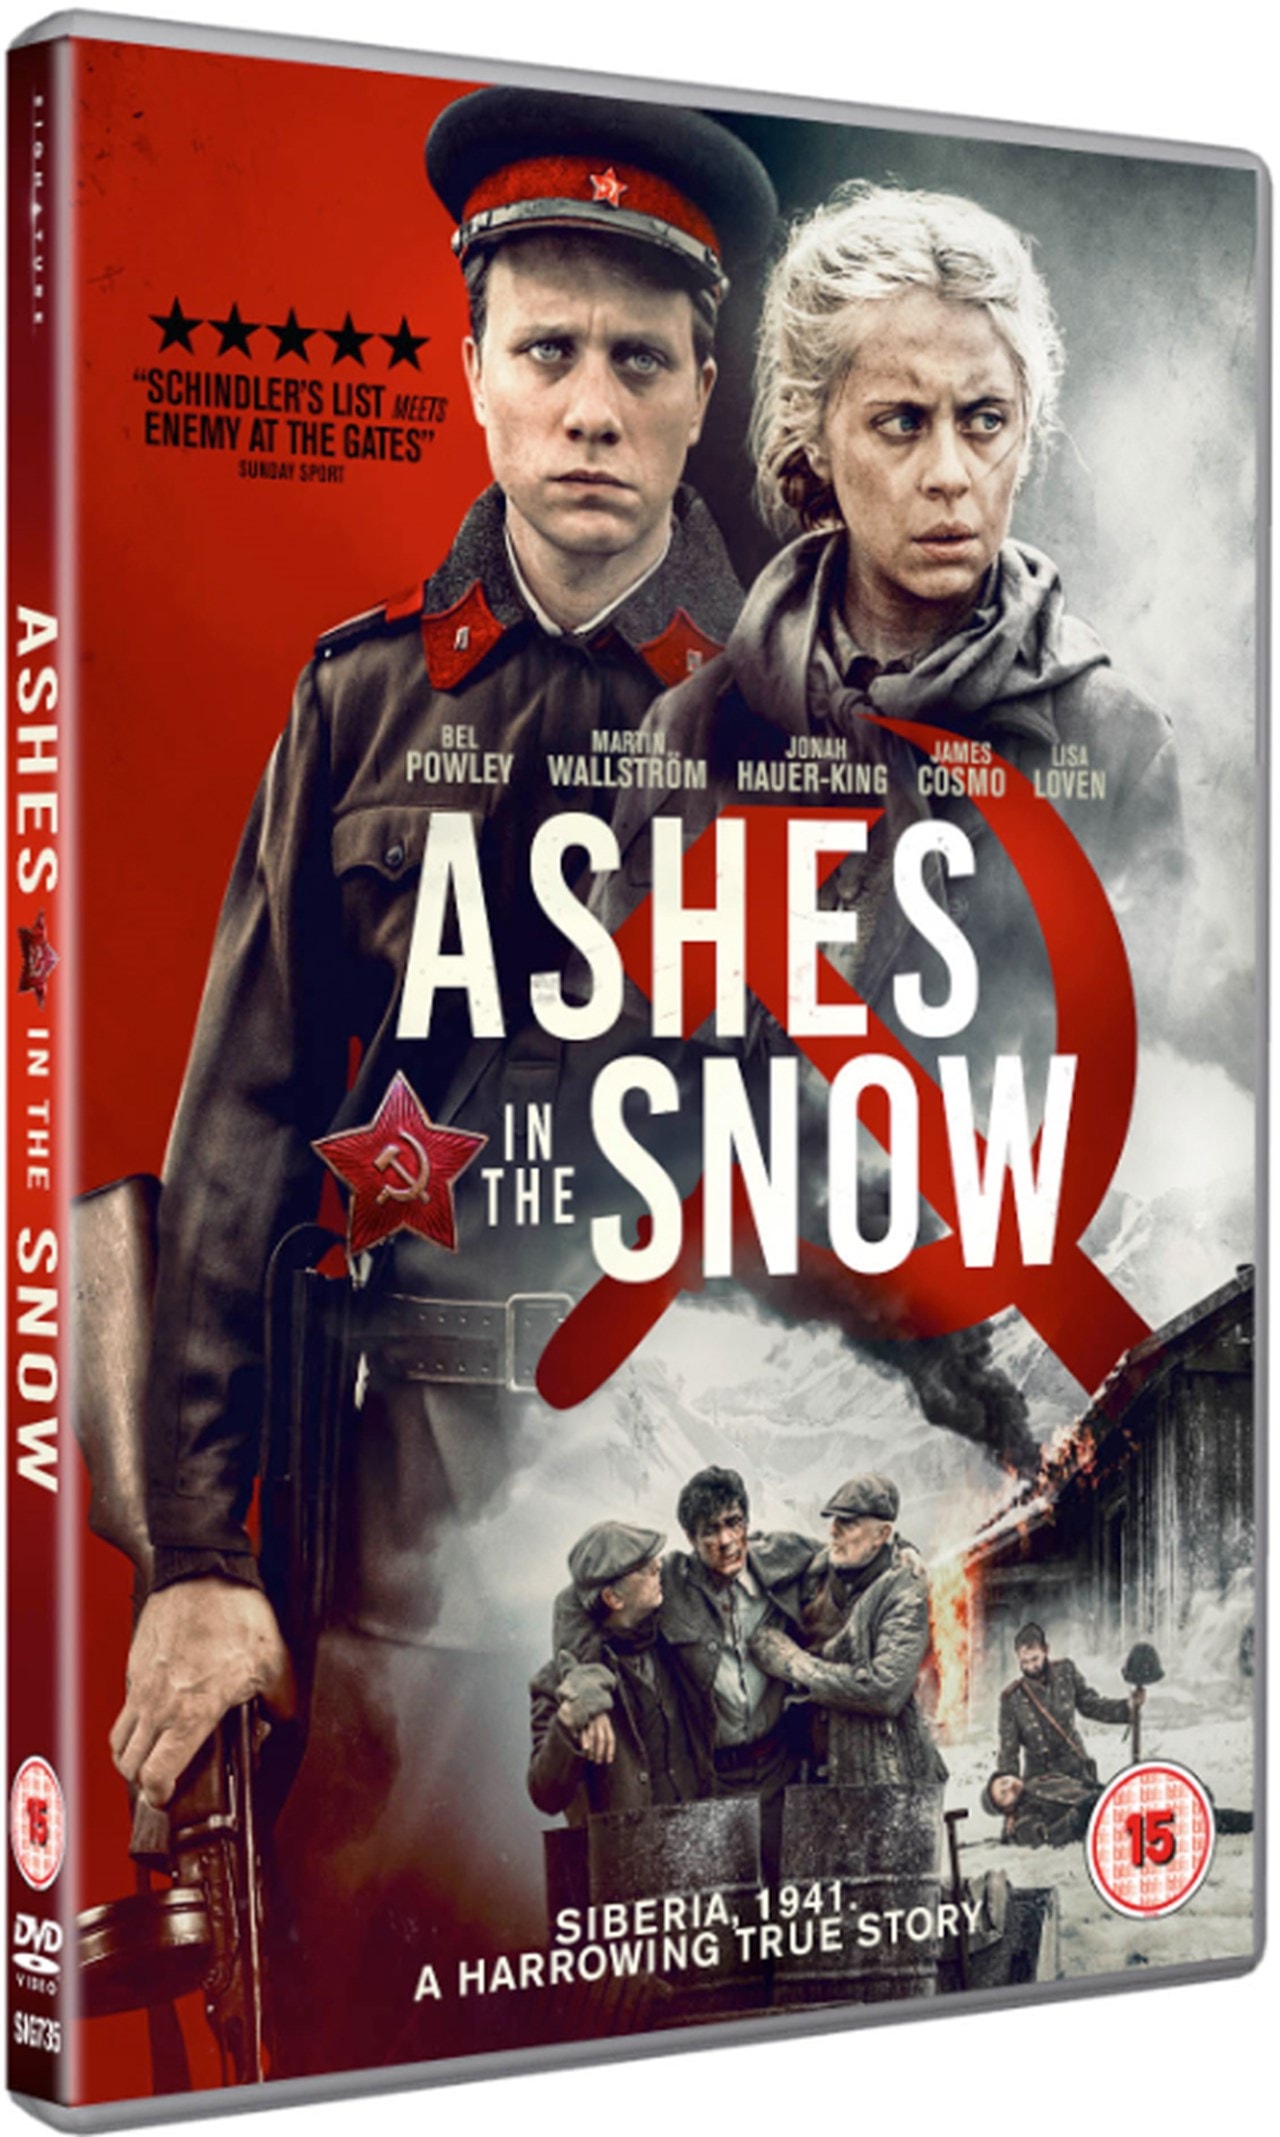 Ashes in the Snow | DVD | Free shipping over £20 | HMV Store